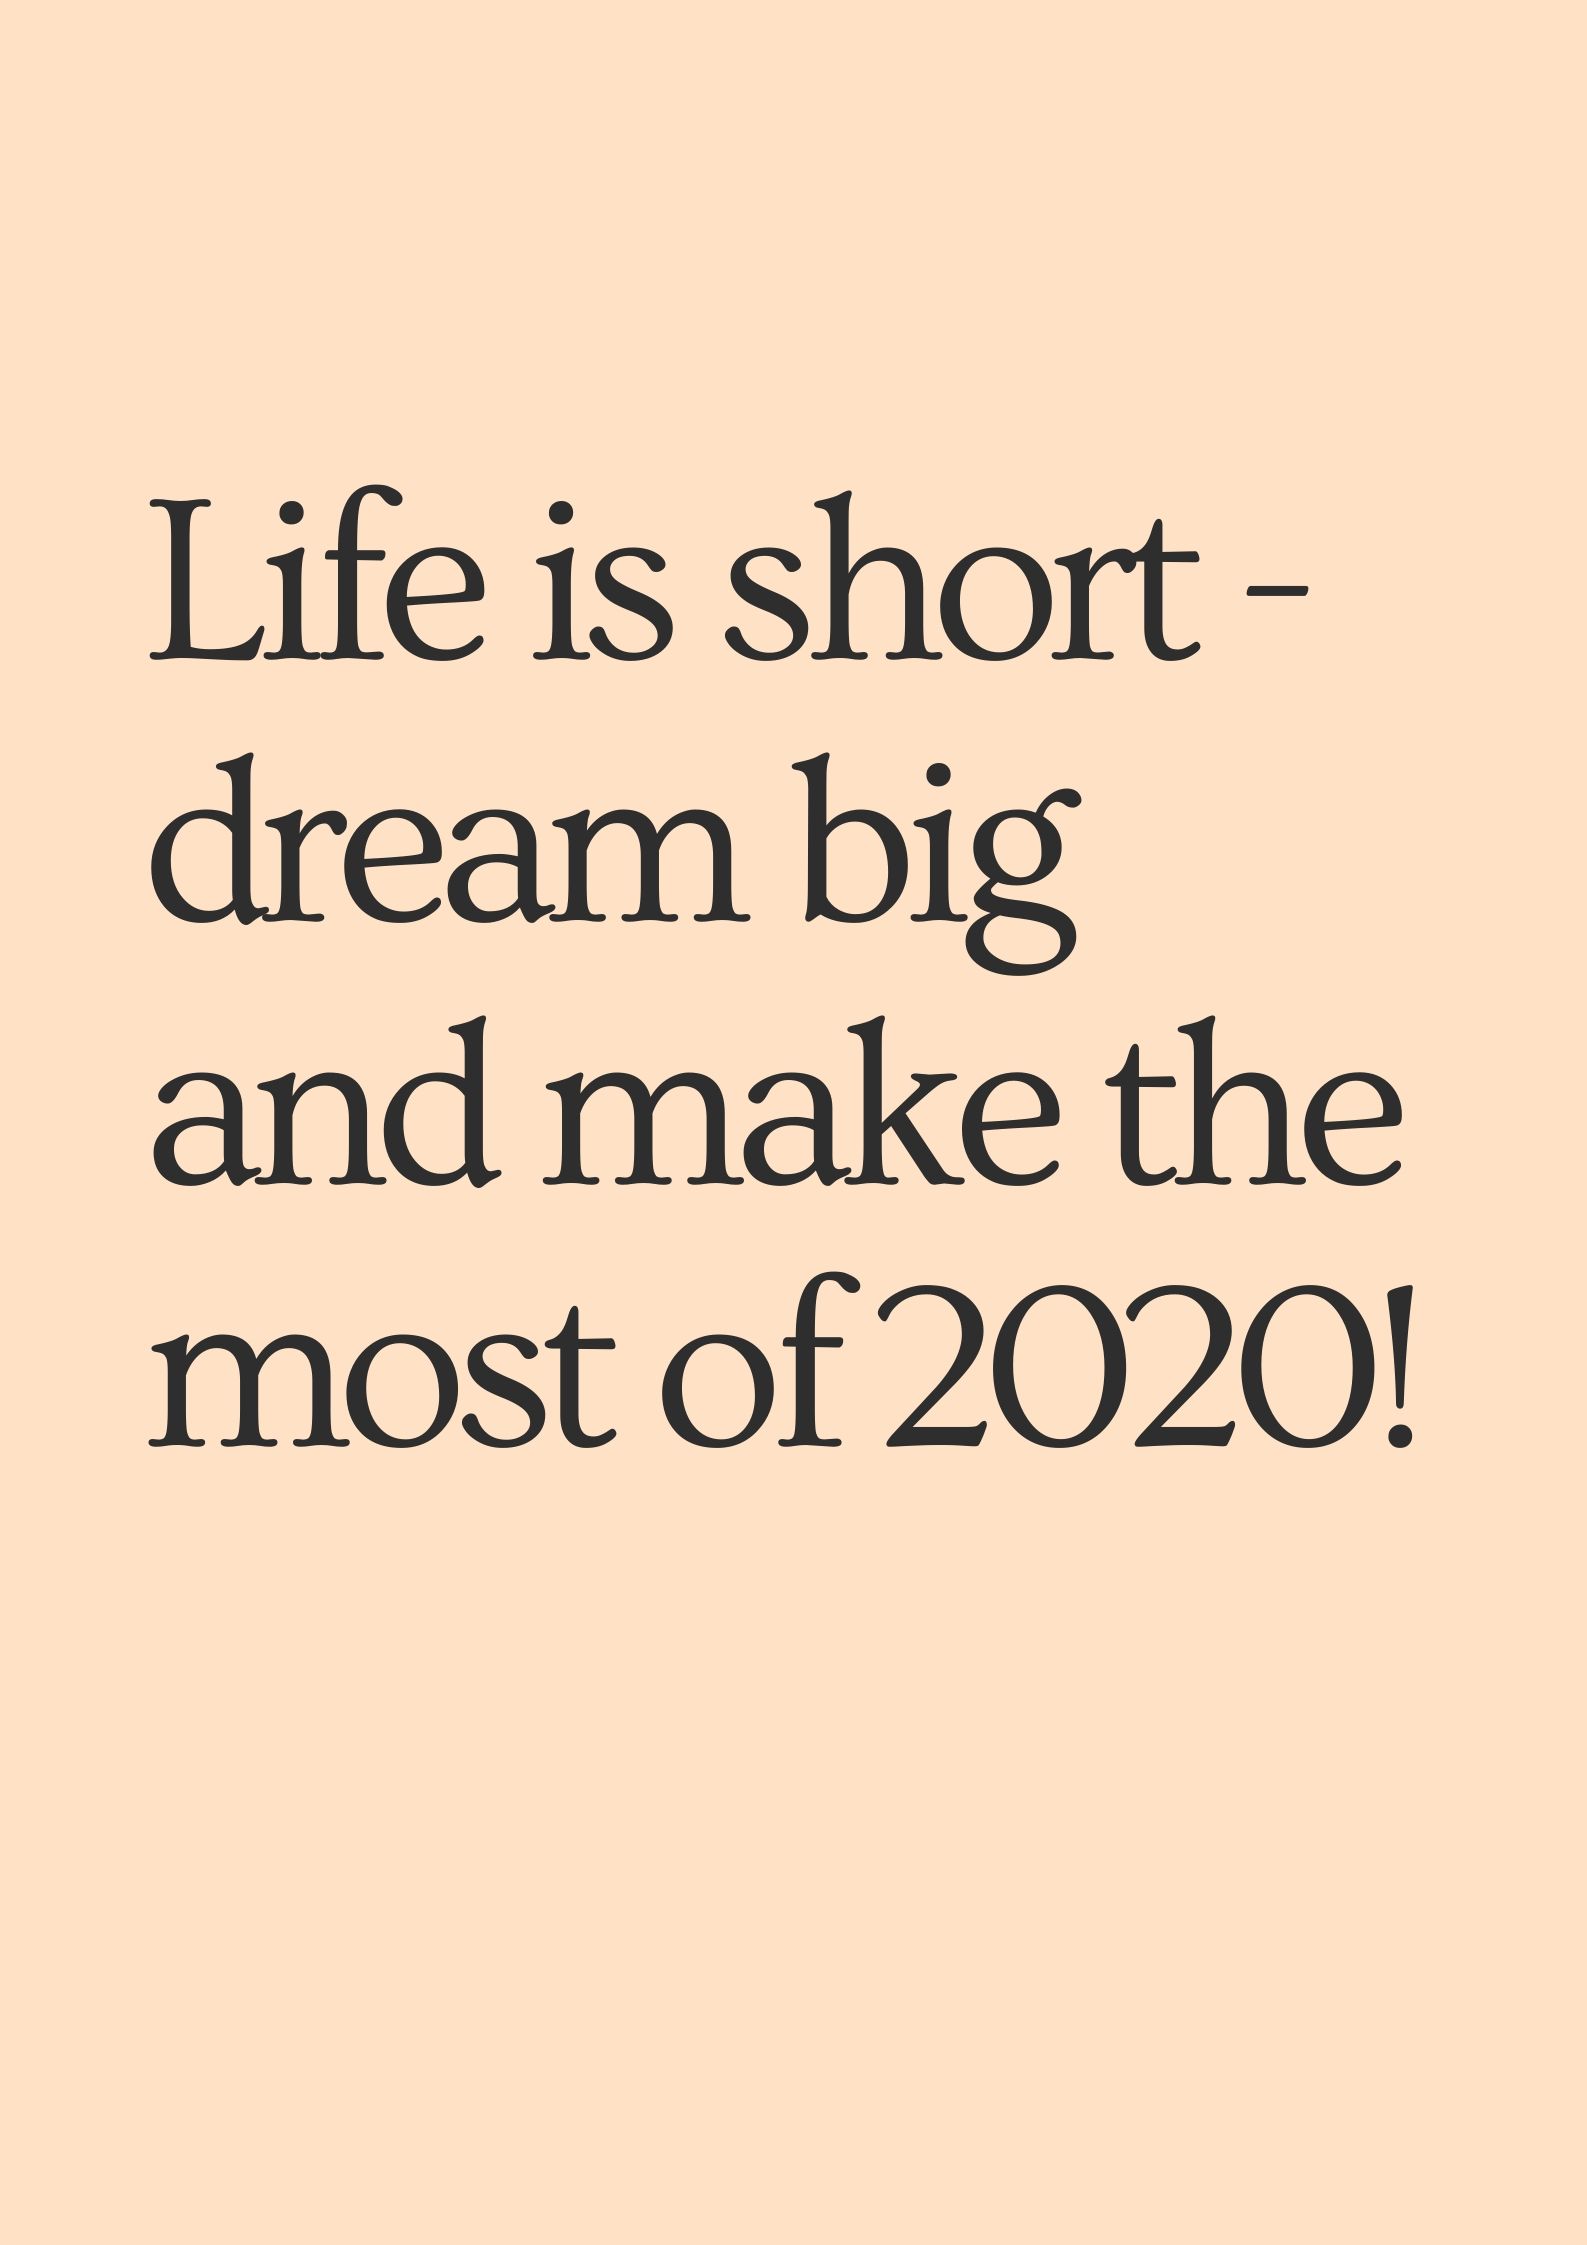 Life is short - dream big and make the most of 2020!